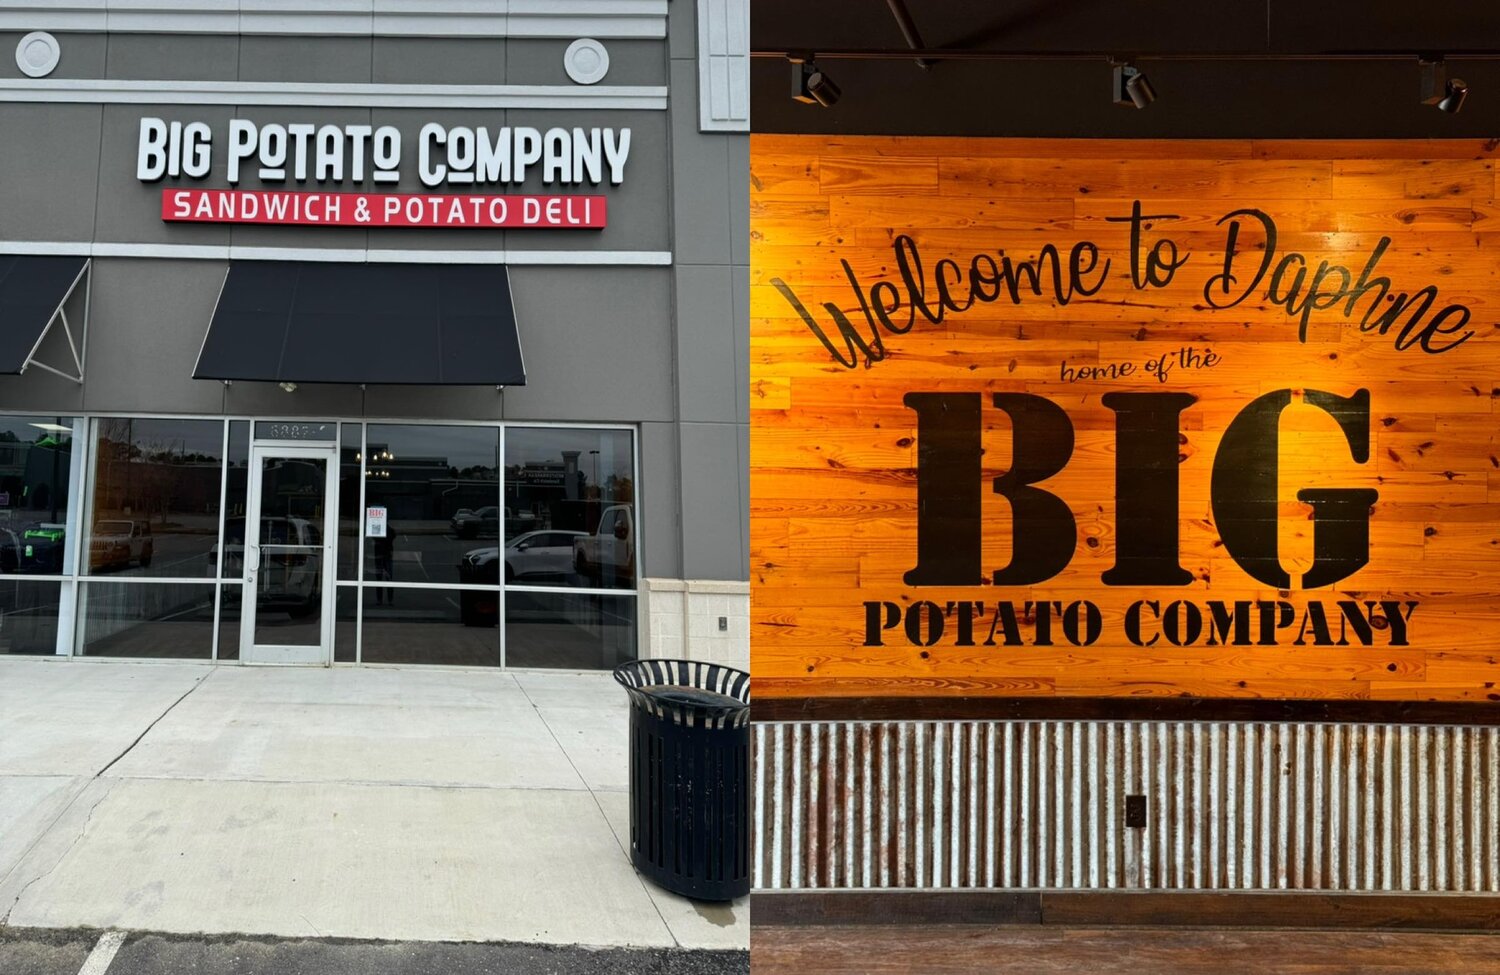 The Jubilee Shopping Center in Daphne will soon offer a new dining option, as Big Potato Company prepares to open its doors.